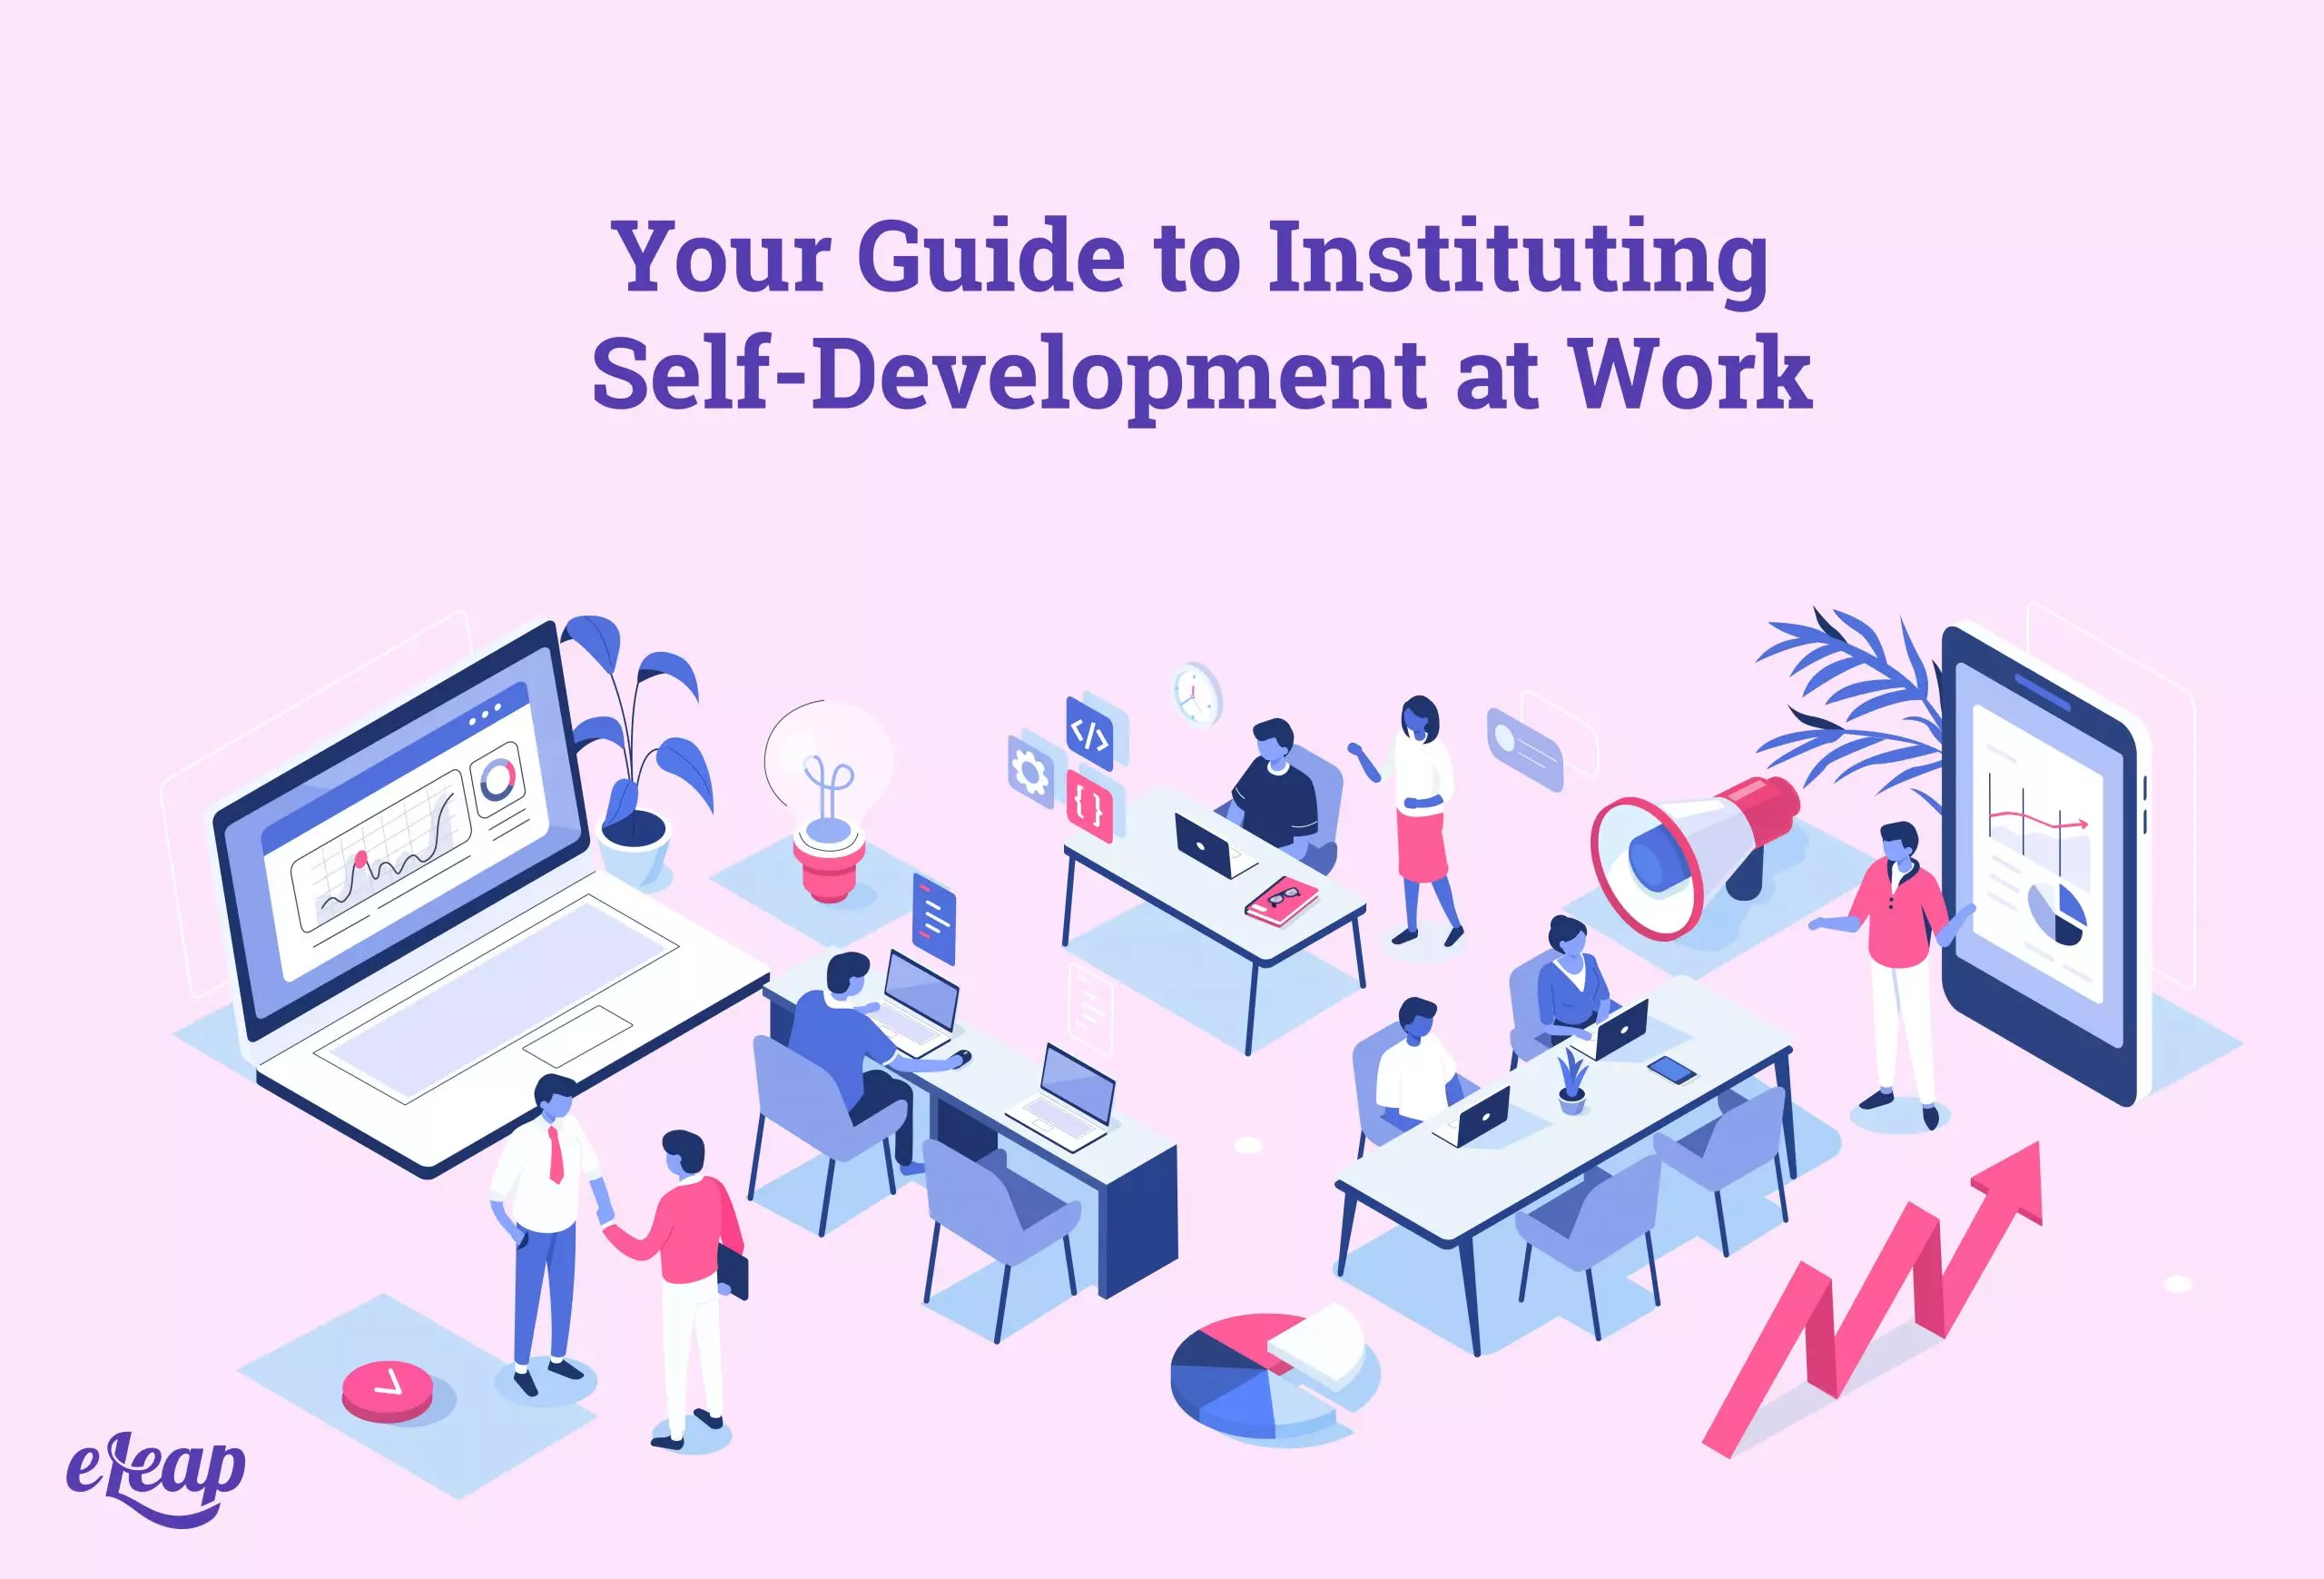 Your Guide to Instituting Self-Development at Work